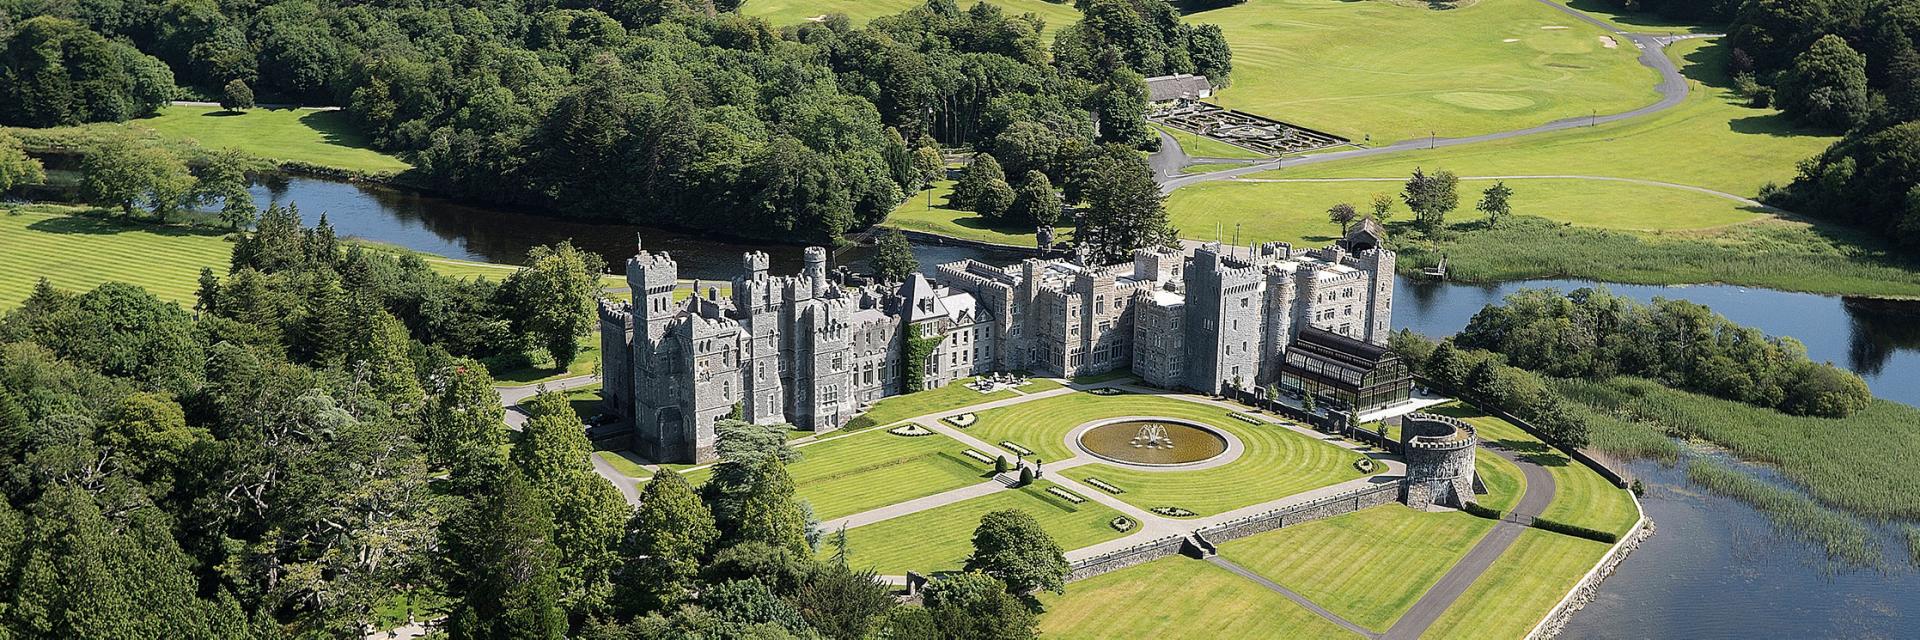 Ashford Castle view from above.